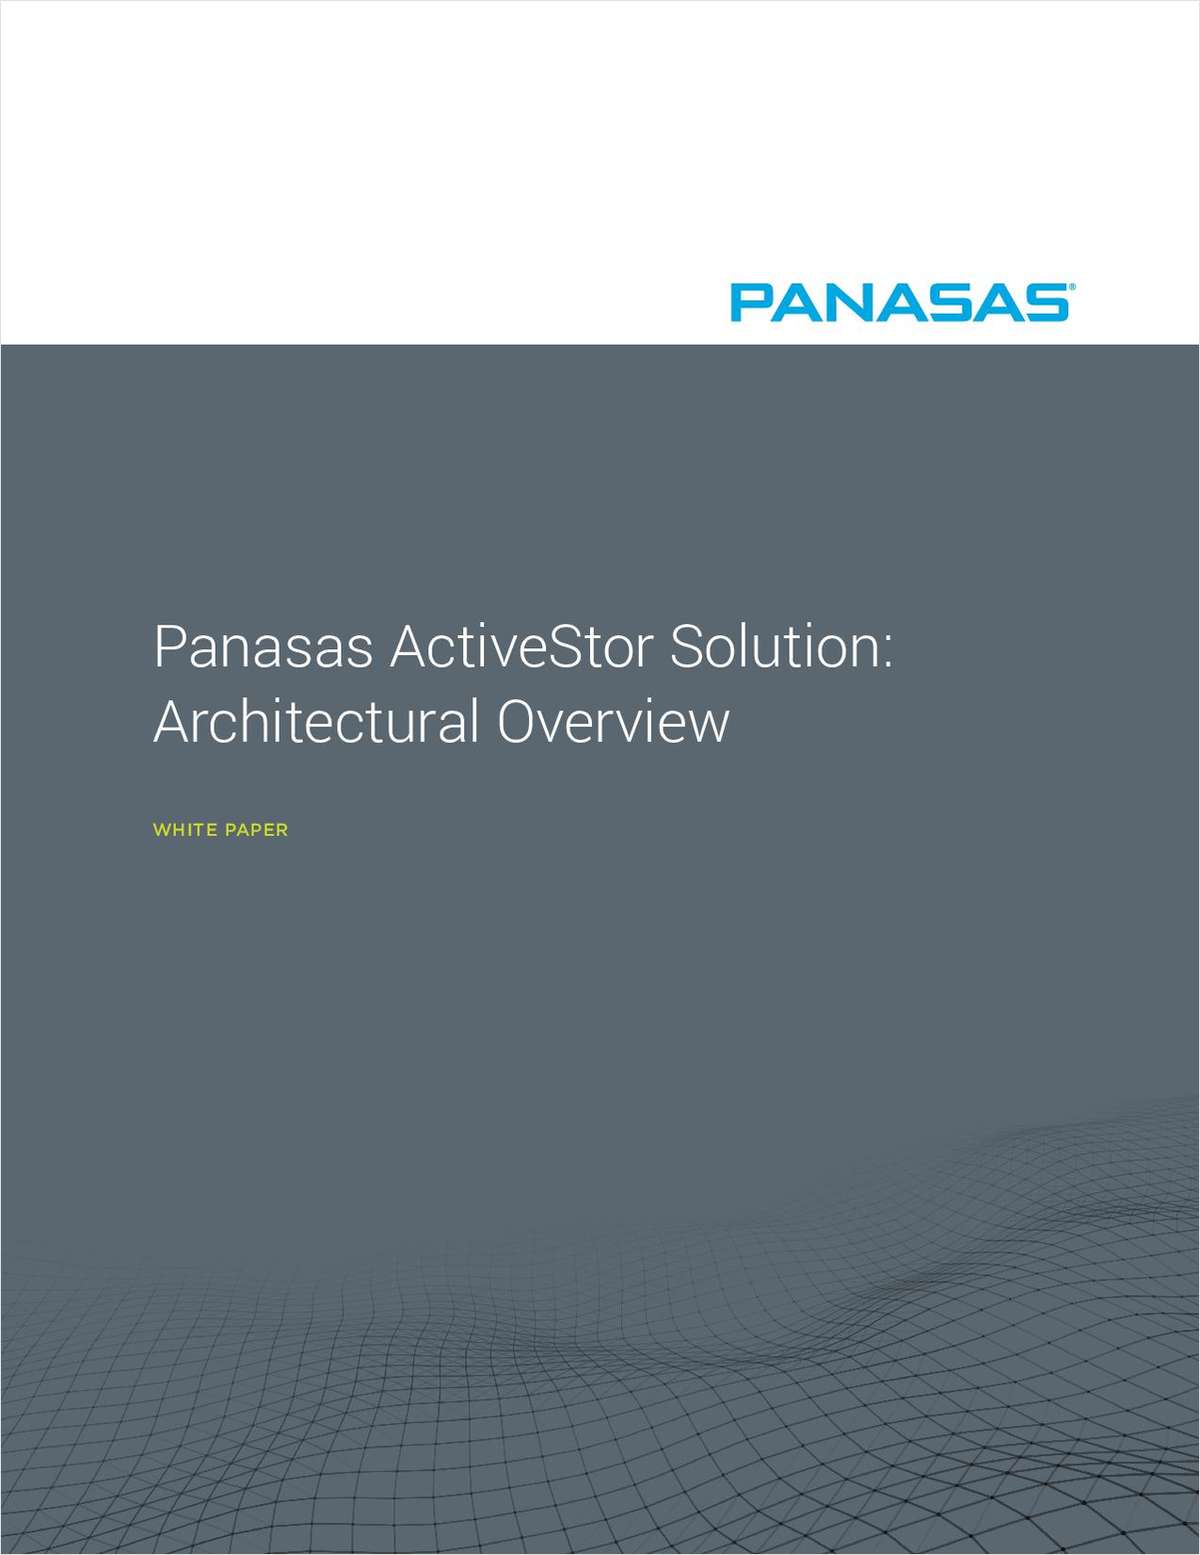 Panasas ActiveStor Solution: Architectural Overview